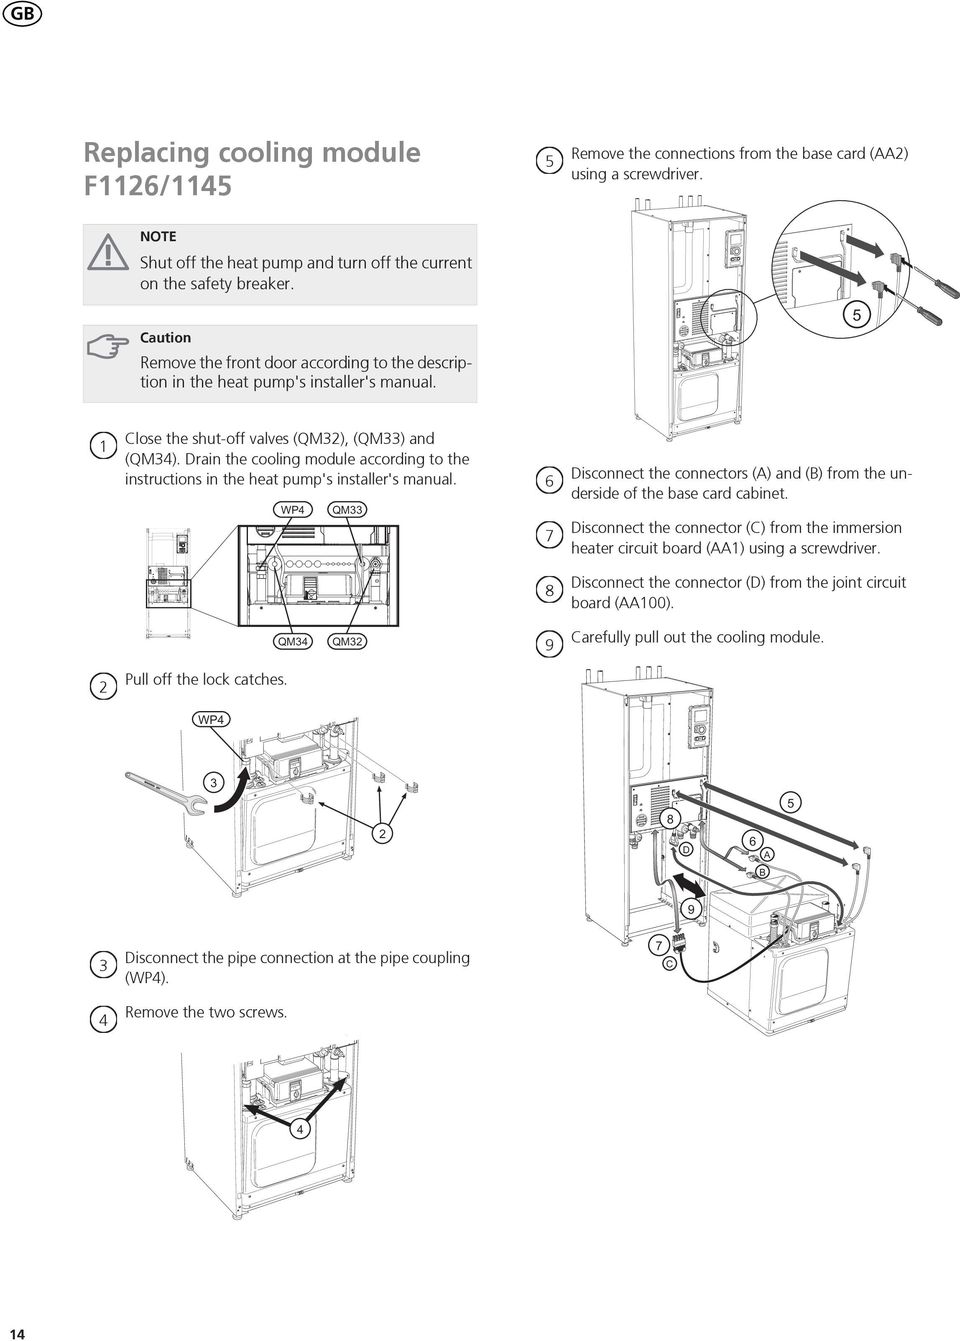 Drain the cooling module according to the instructions in the heat pump's installer's manual. 7 Disconnect the connectors (A) and (B) from the underside of the base card cabinet.